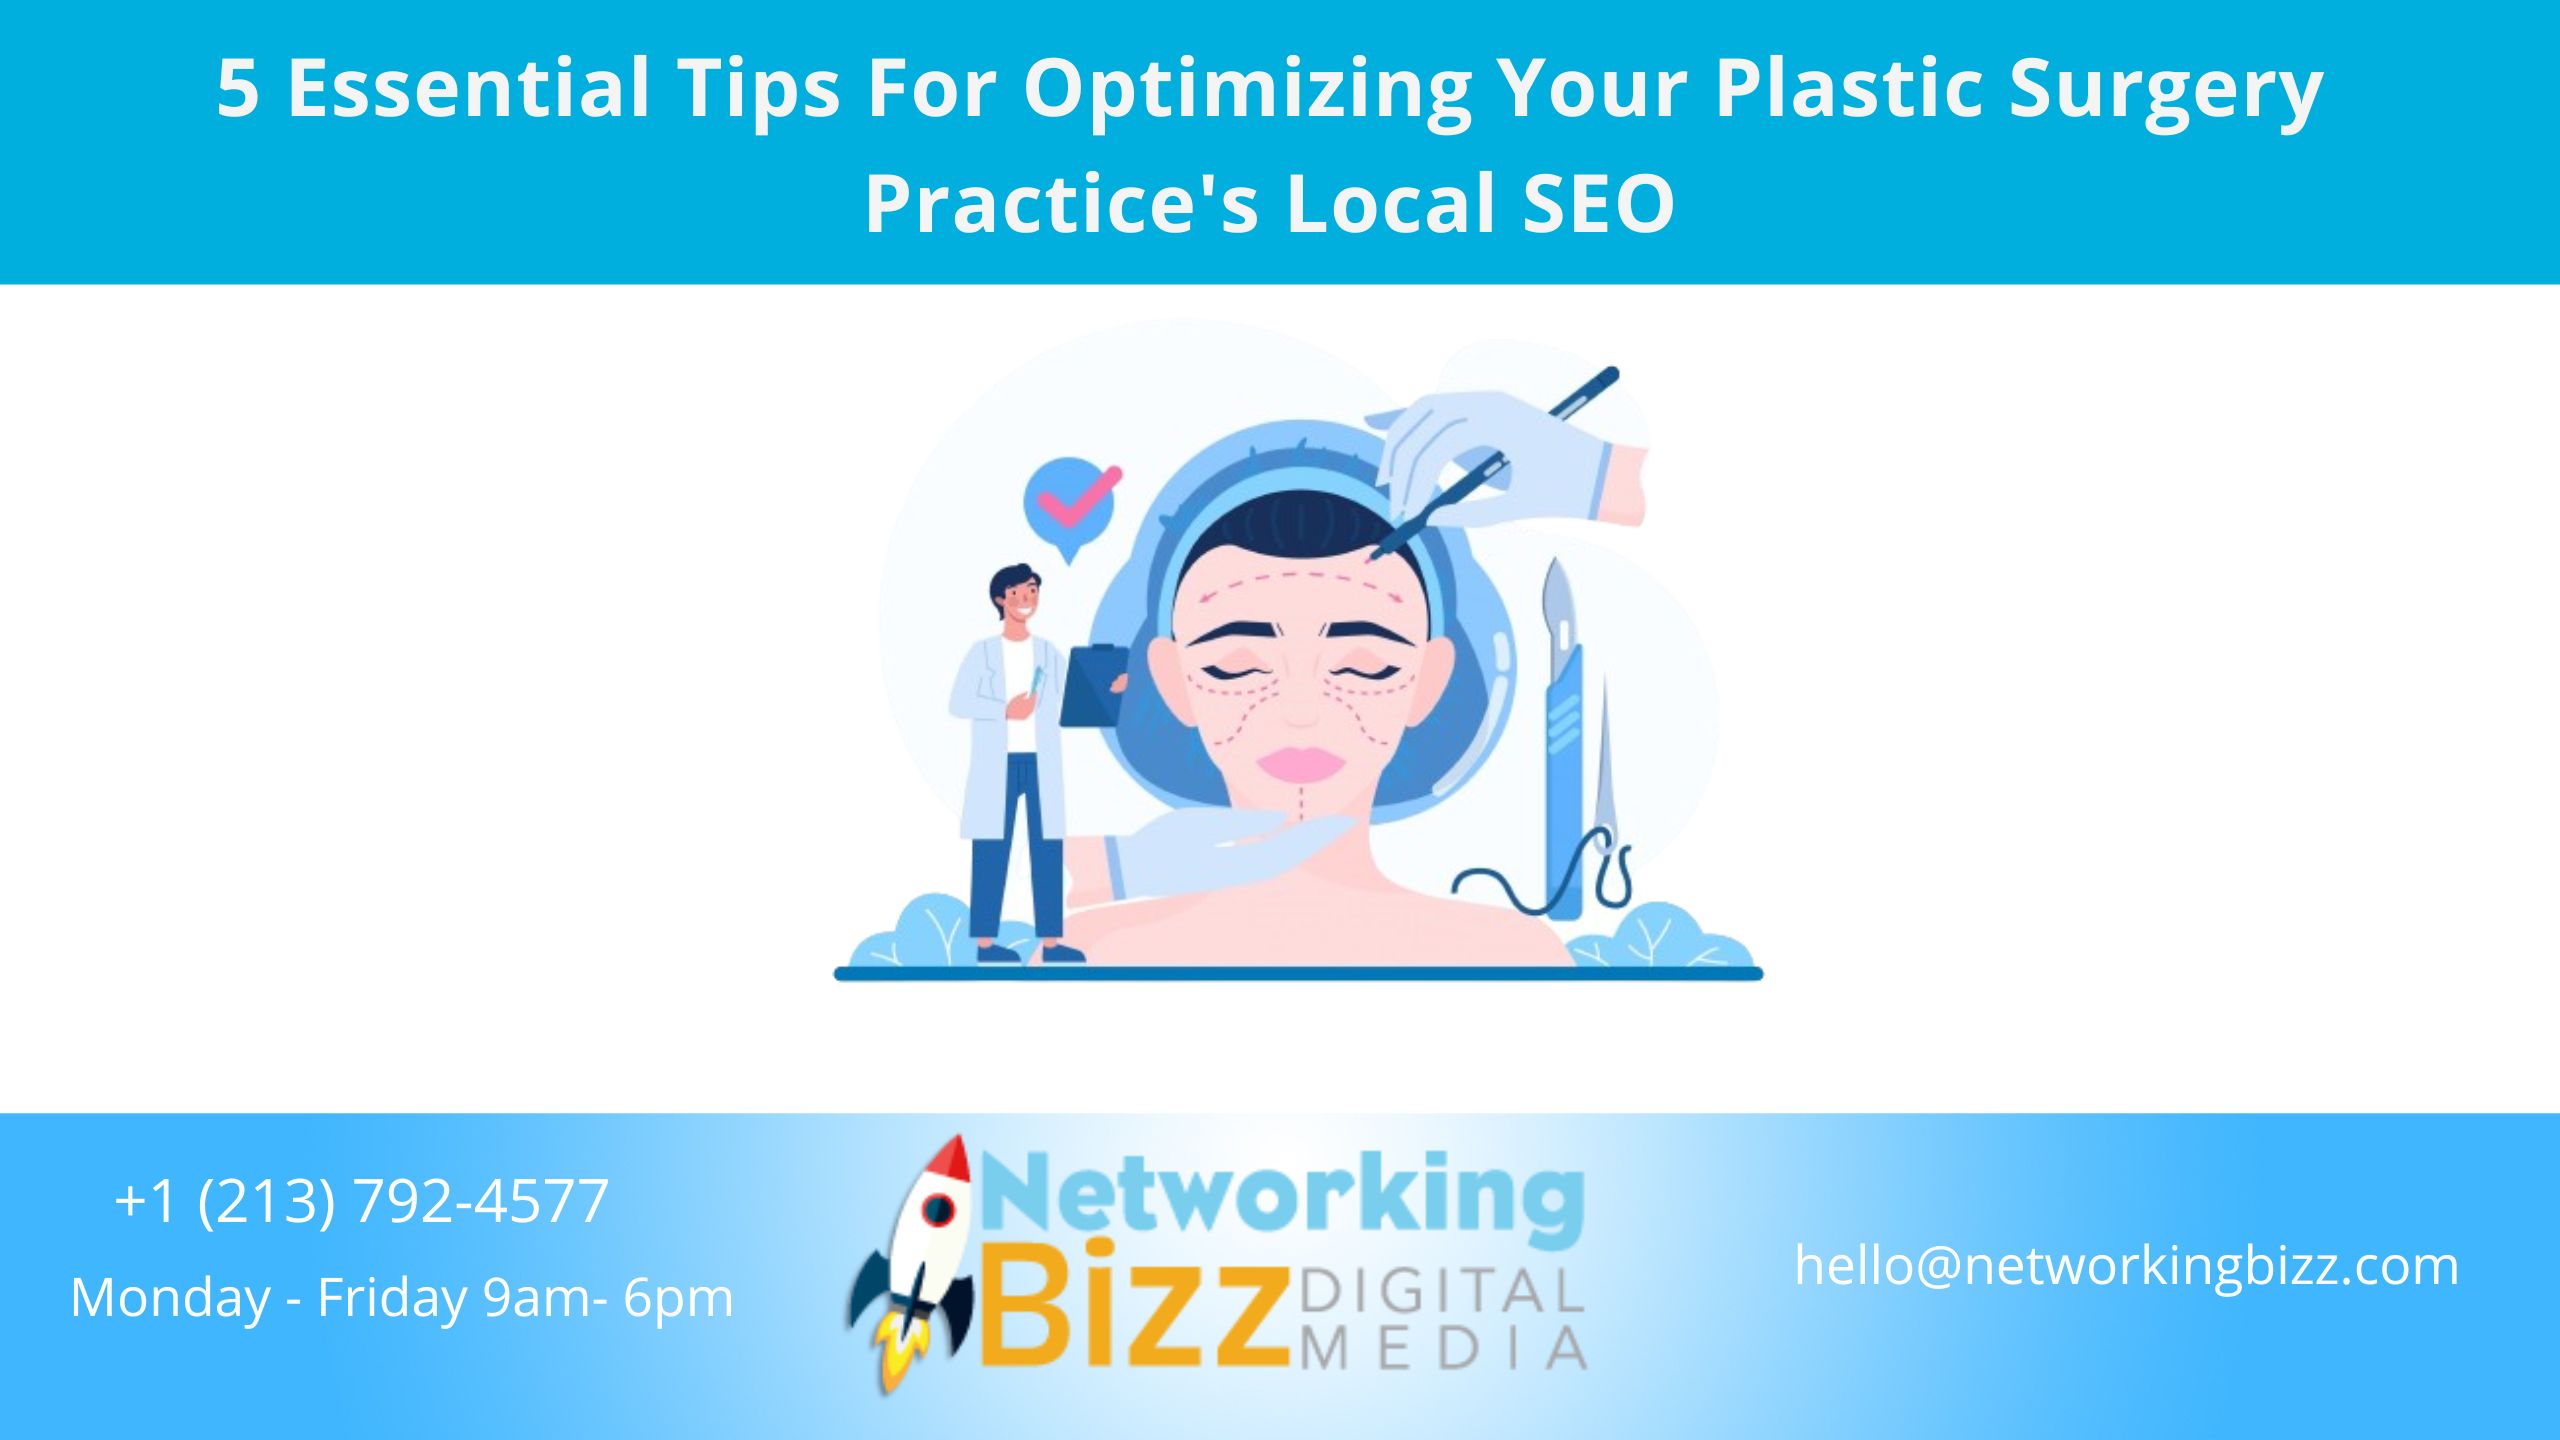 5 Essential Tips For Optimizing Your Plastic Surgery Practice’s Local SEO